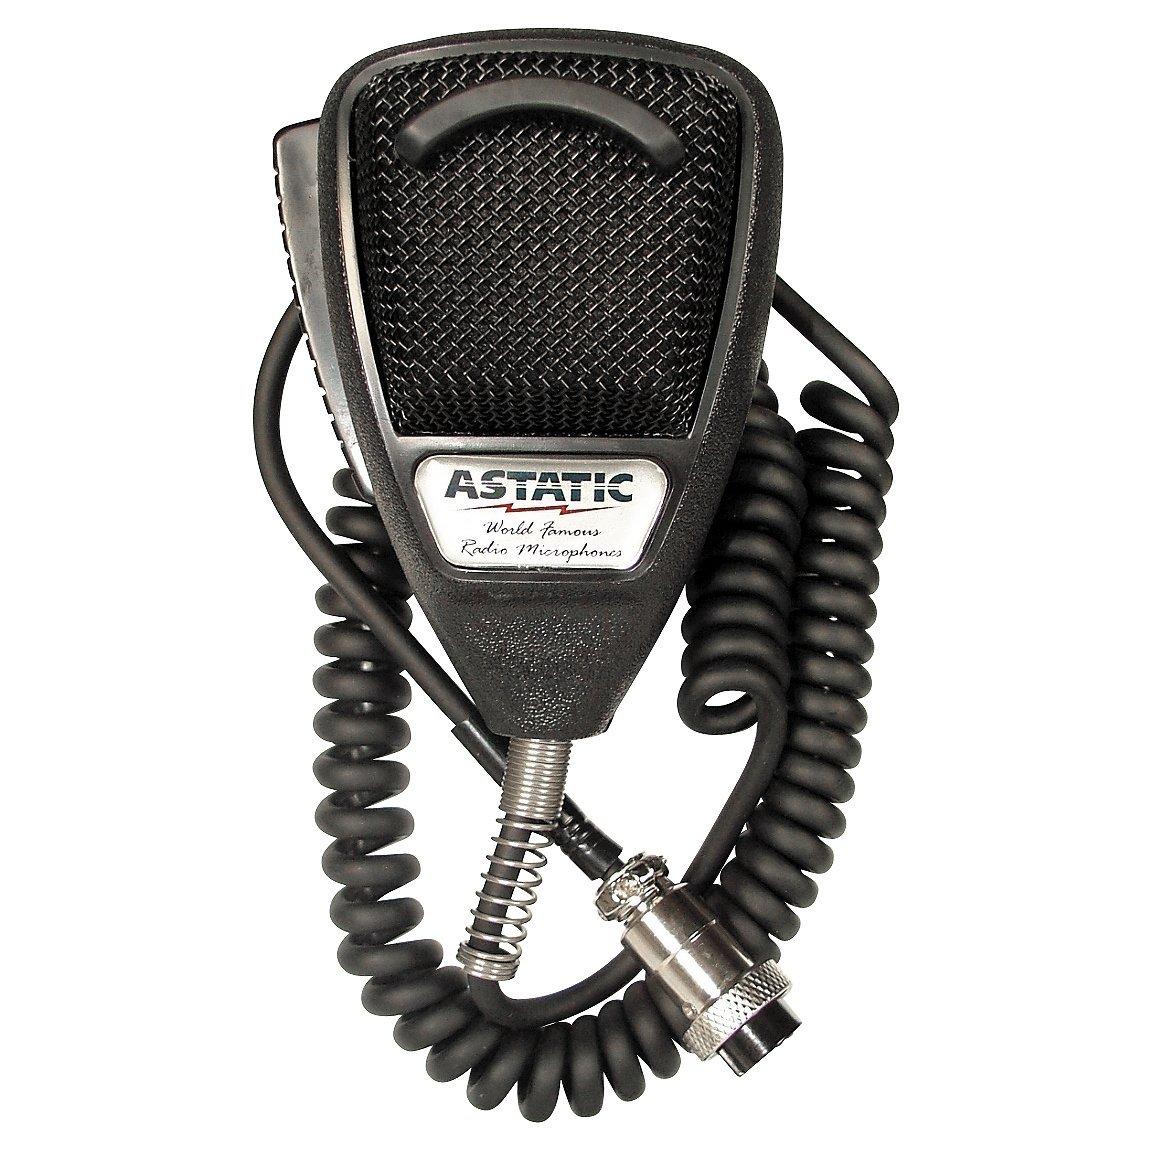 Astatic 636L Noise Cancelling CB Microphone Refurbished